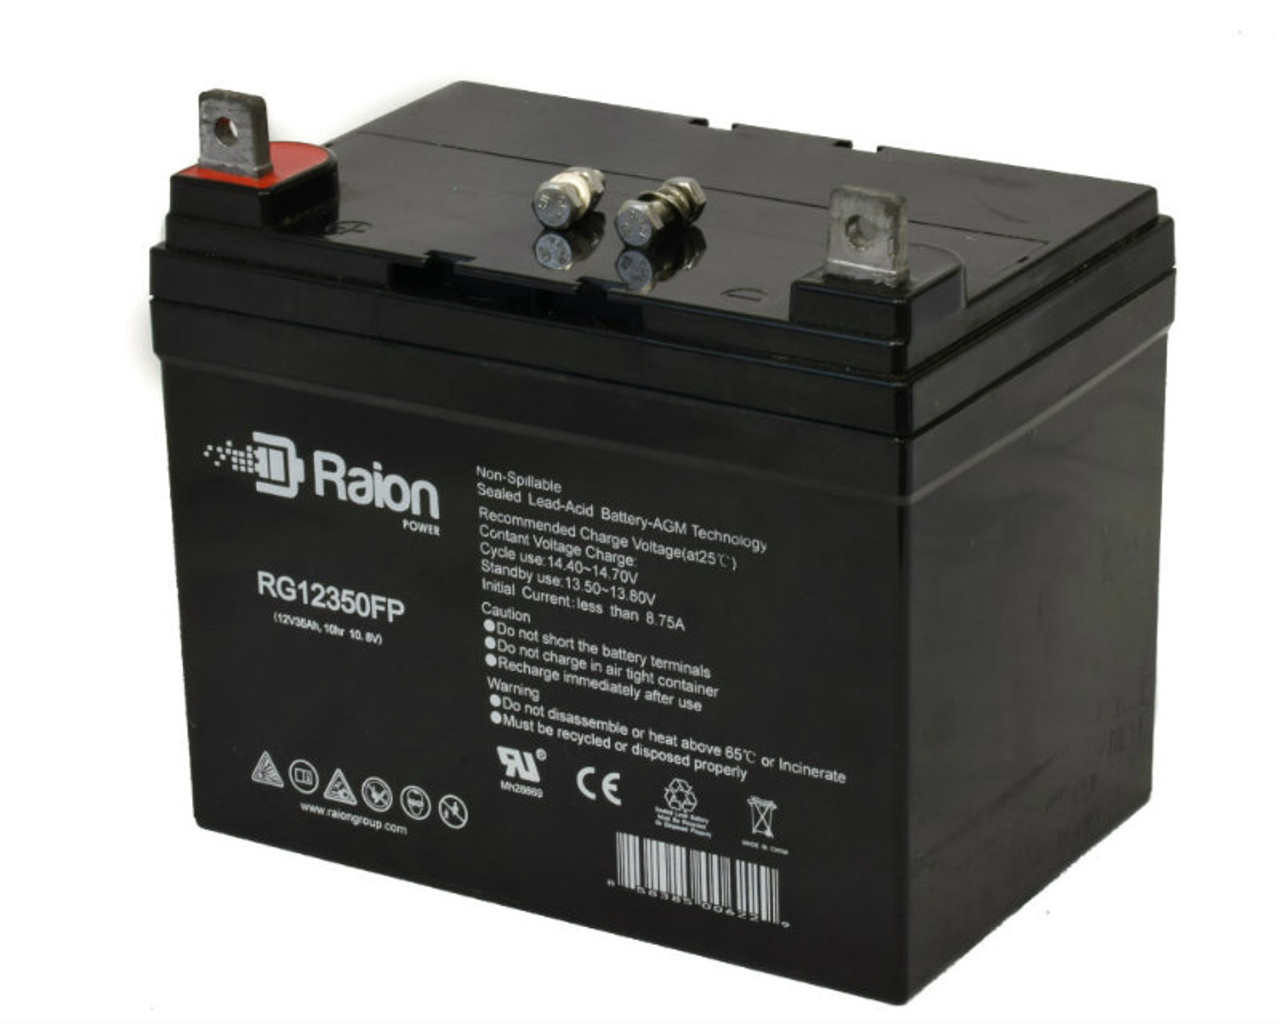 Raion Power Replacement 12V 35Ah RG12350FP Mobility Scooter Battery for Quickie V521 Folding